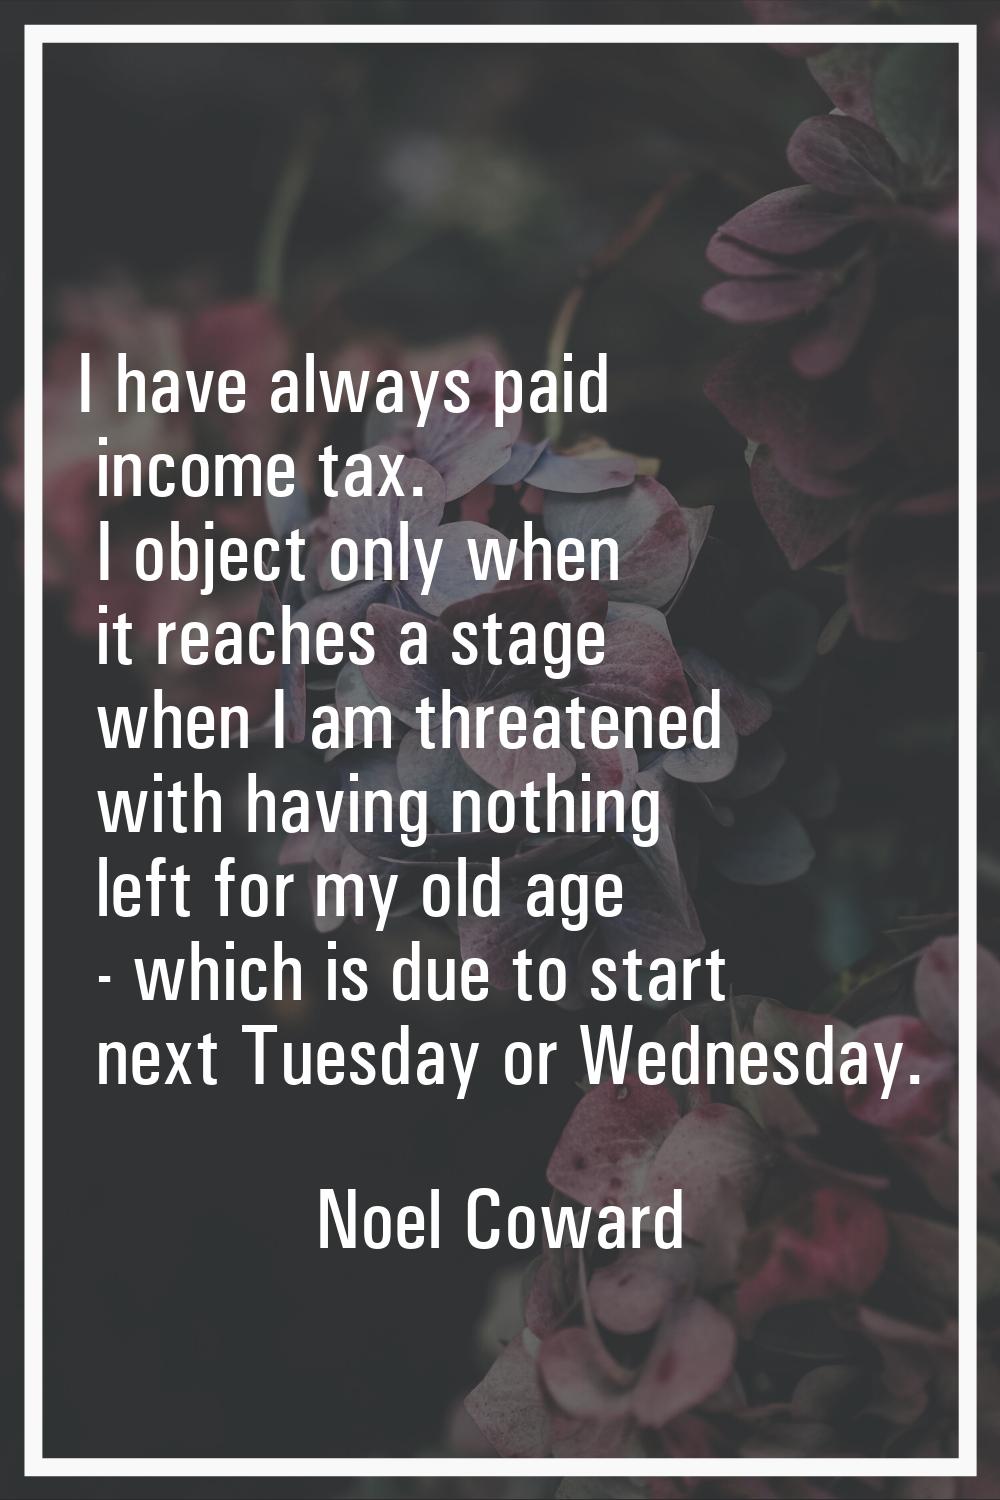 I have always paid income tax. I object only when it reaches a stage when I am threatened with havi